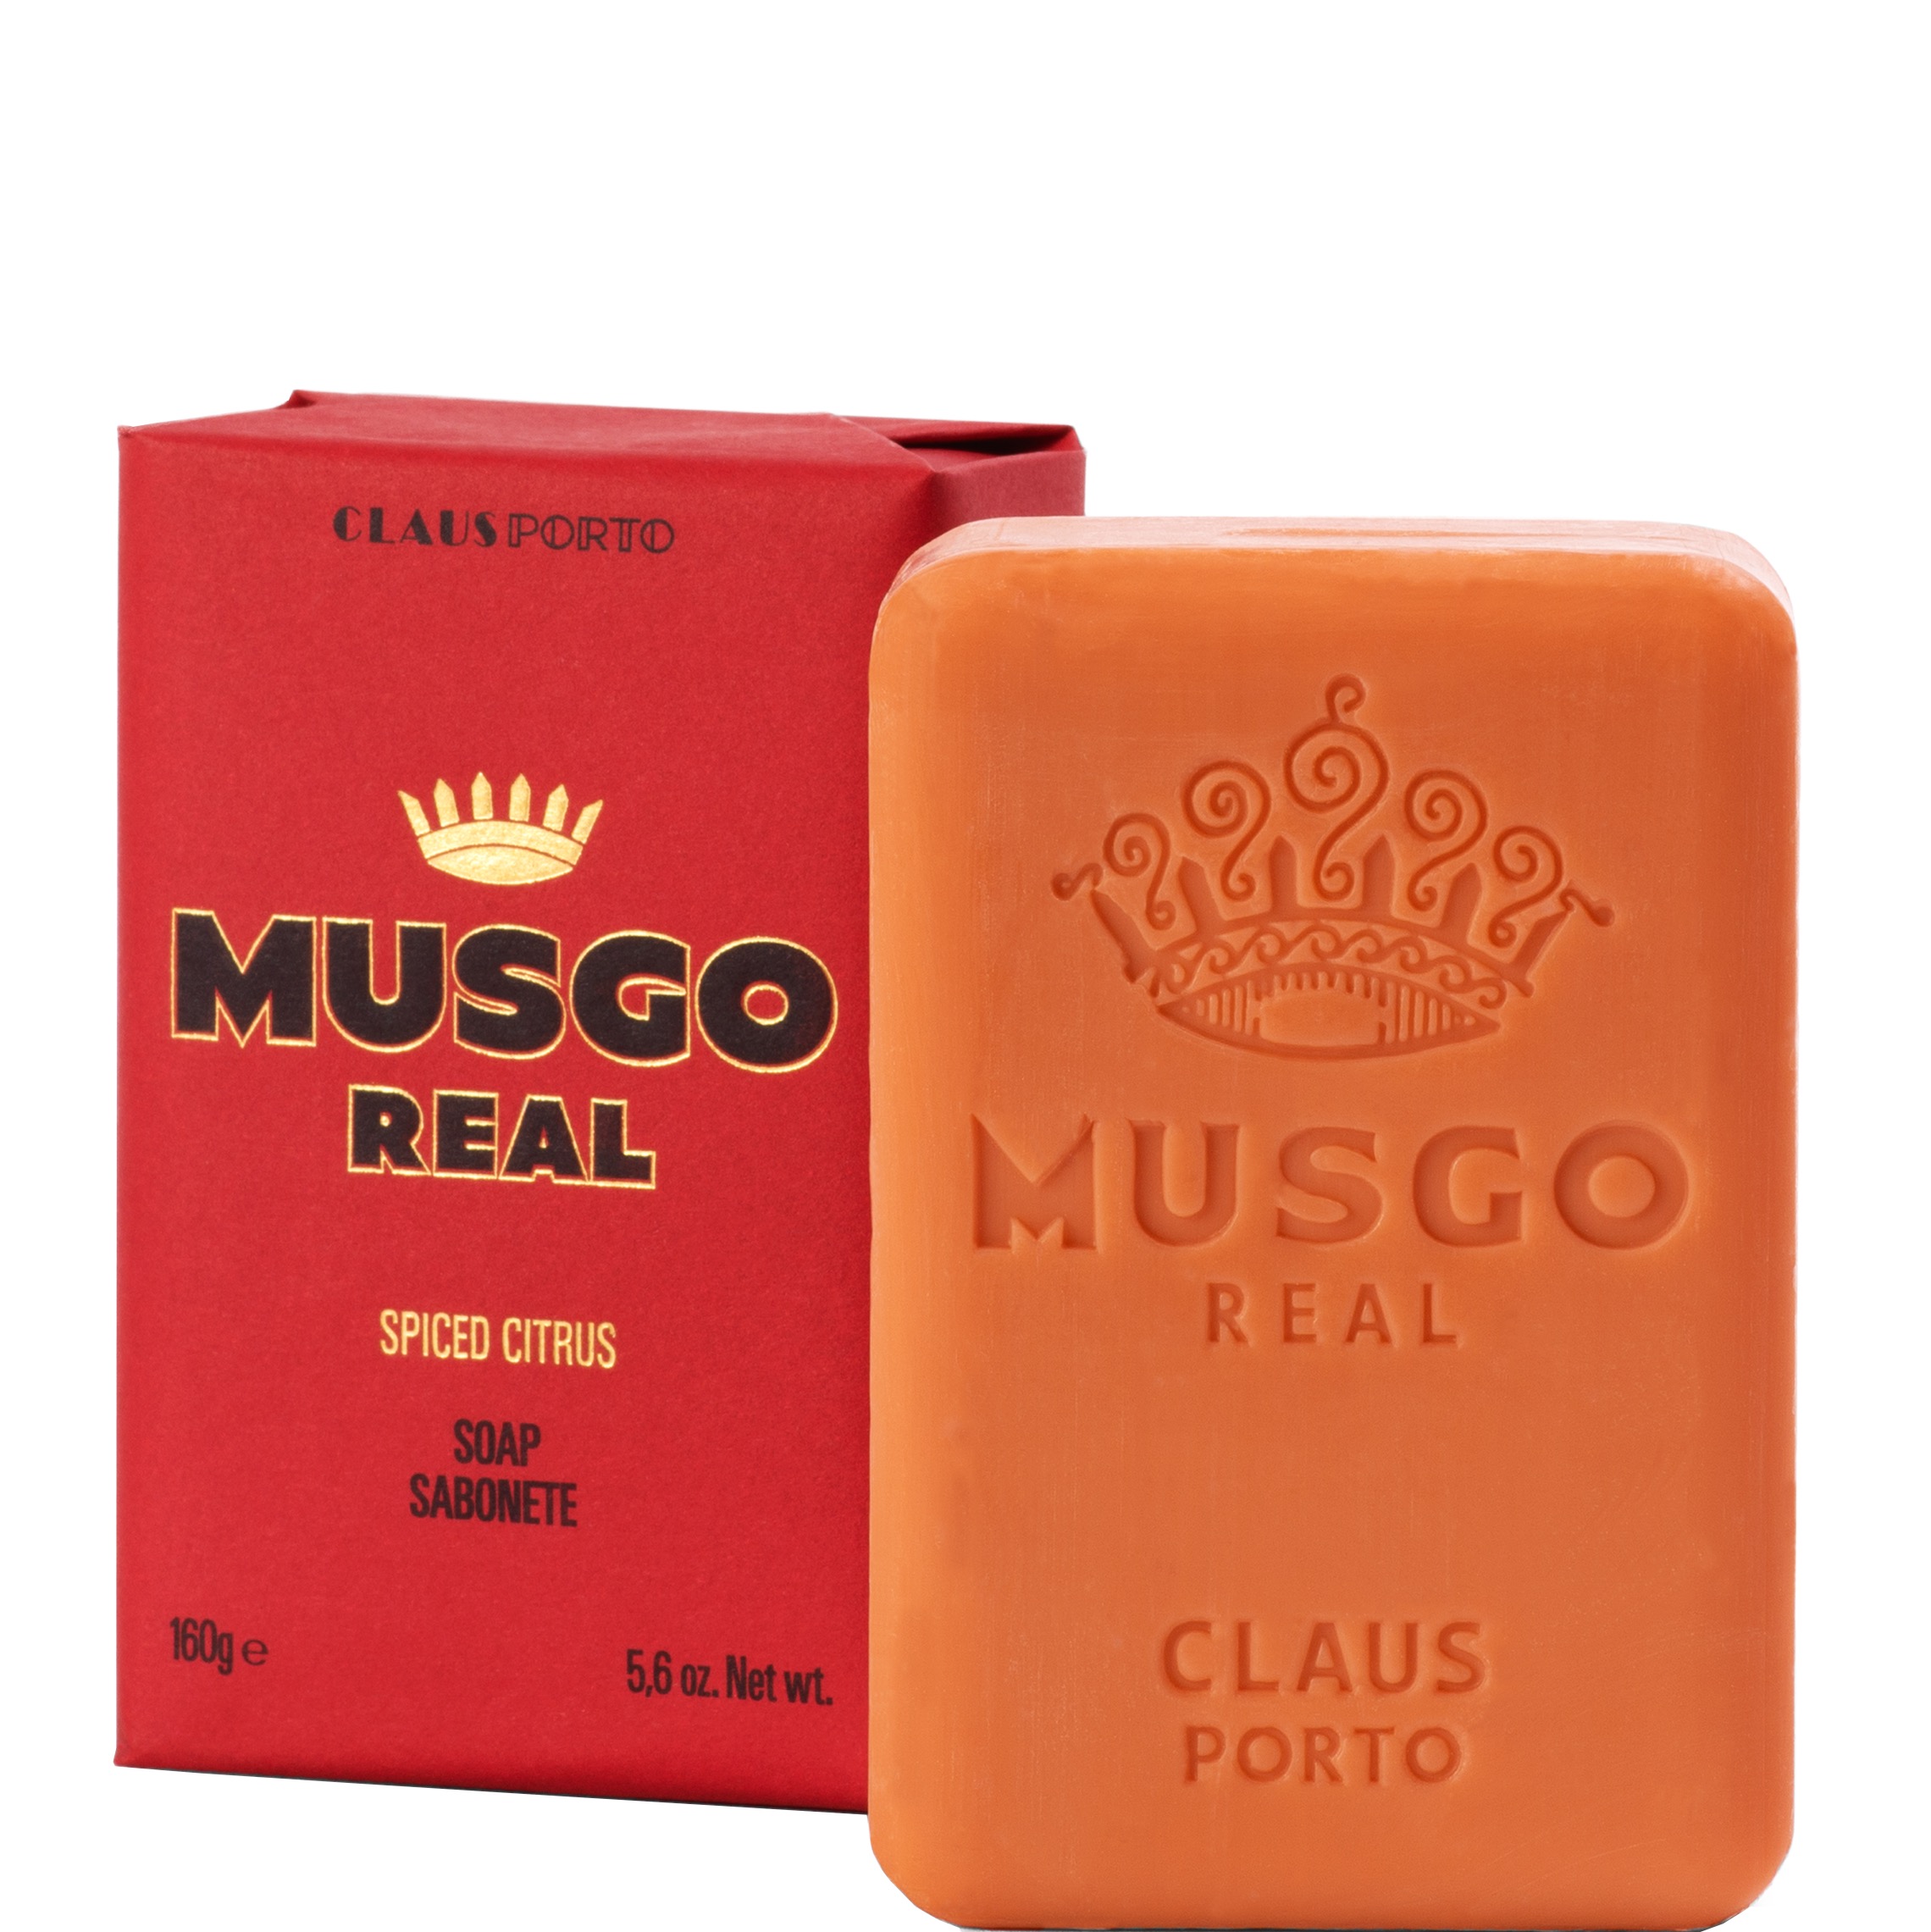 Musgo Real Body Soap Spiced Citrus 160gr - 1.1 - MR-199EXP003